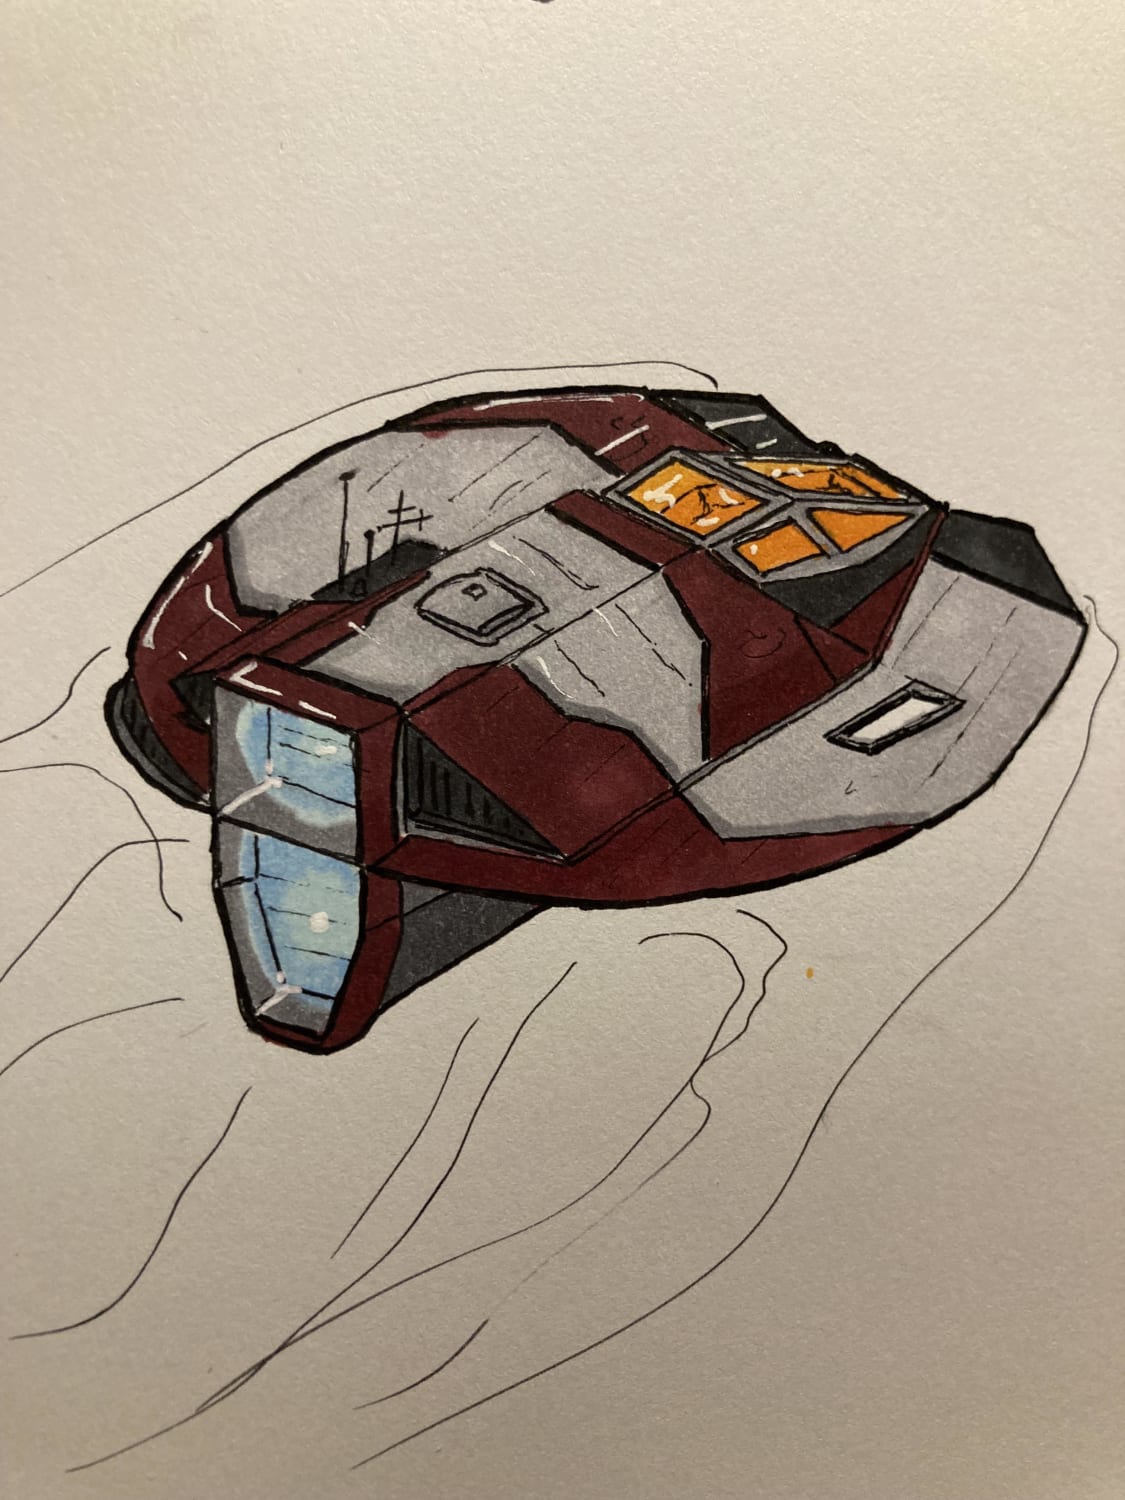 An experimental landspeeder. Initial Idea was to do something that is circular, the result looks like a mixture between a SW snowspeeder and a Battlestar Raider